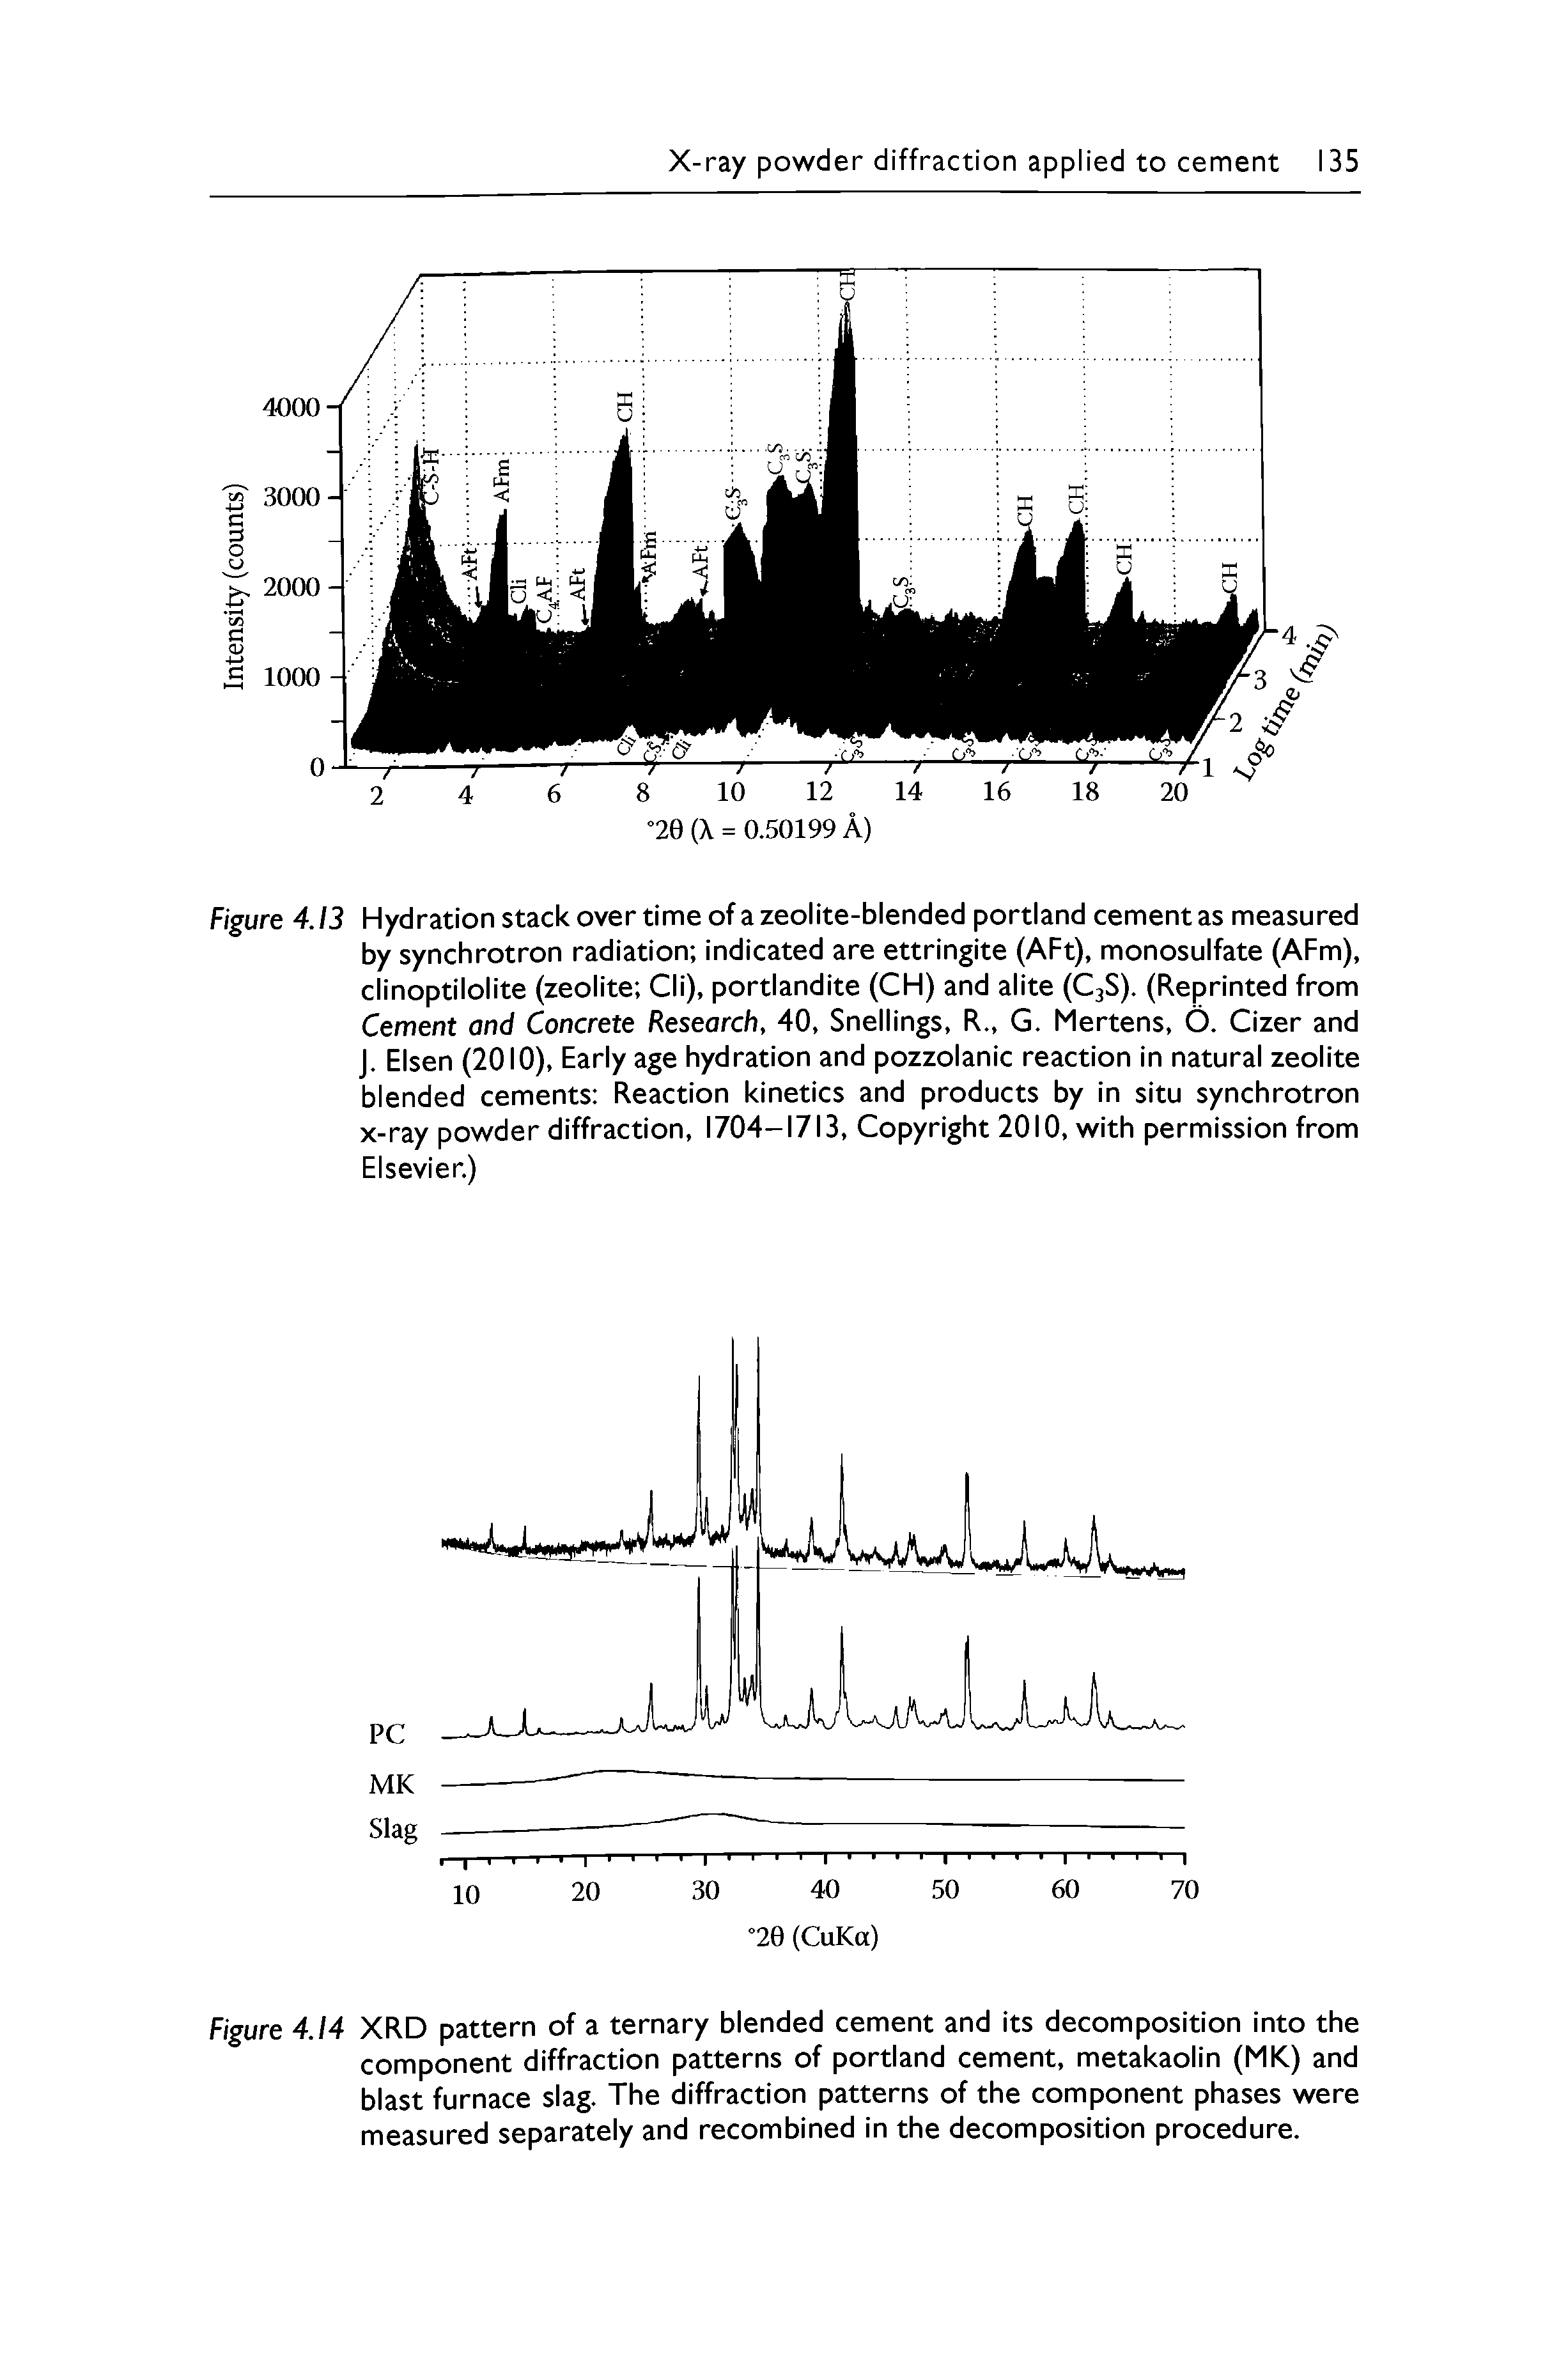 Figure 4.13 Hydration stack over time of a zeolite-blended portland cement as measured by synchrotron radiation indicated are ettringite (AFt), monosulfate (AFm), clinoptilolite (zeolite Cli), portlandite (CH) and alite (C3S). (Reprinted from Cement and Concrete Research, 40, Snellings, R., G. Mertens, O. Cizer and J. Elsen (2010), Early age hydration and pozzolanic reaction in natural zeolite blended cements Reaction kinetics and products by in situ synchrotron x-ray powder diffraction, 1704-1713, Copyright 2010, with permission from Elsevier.)...